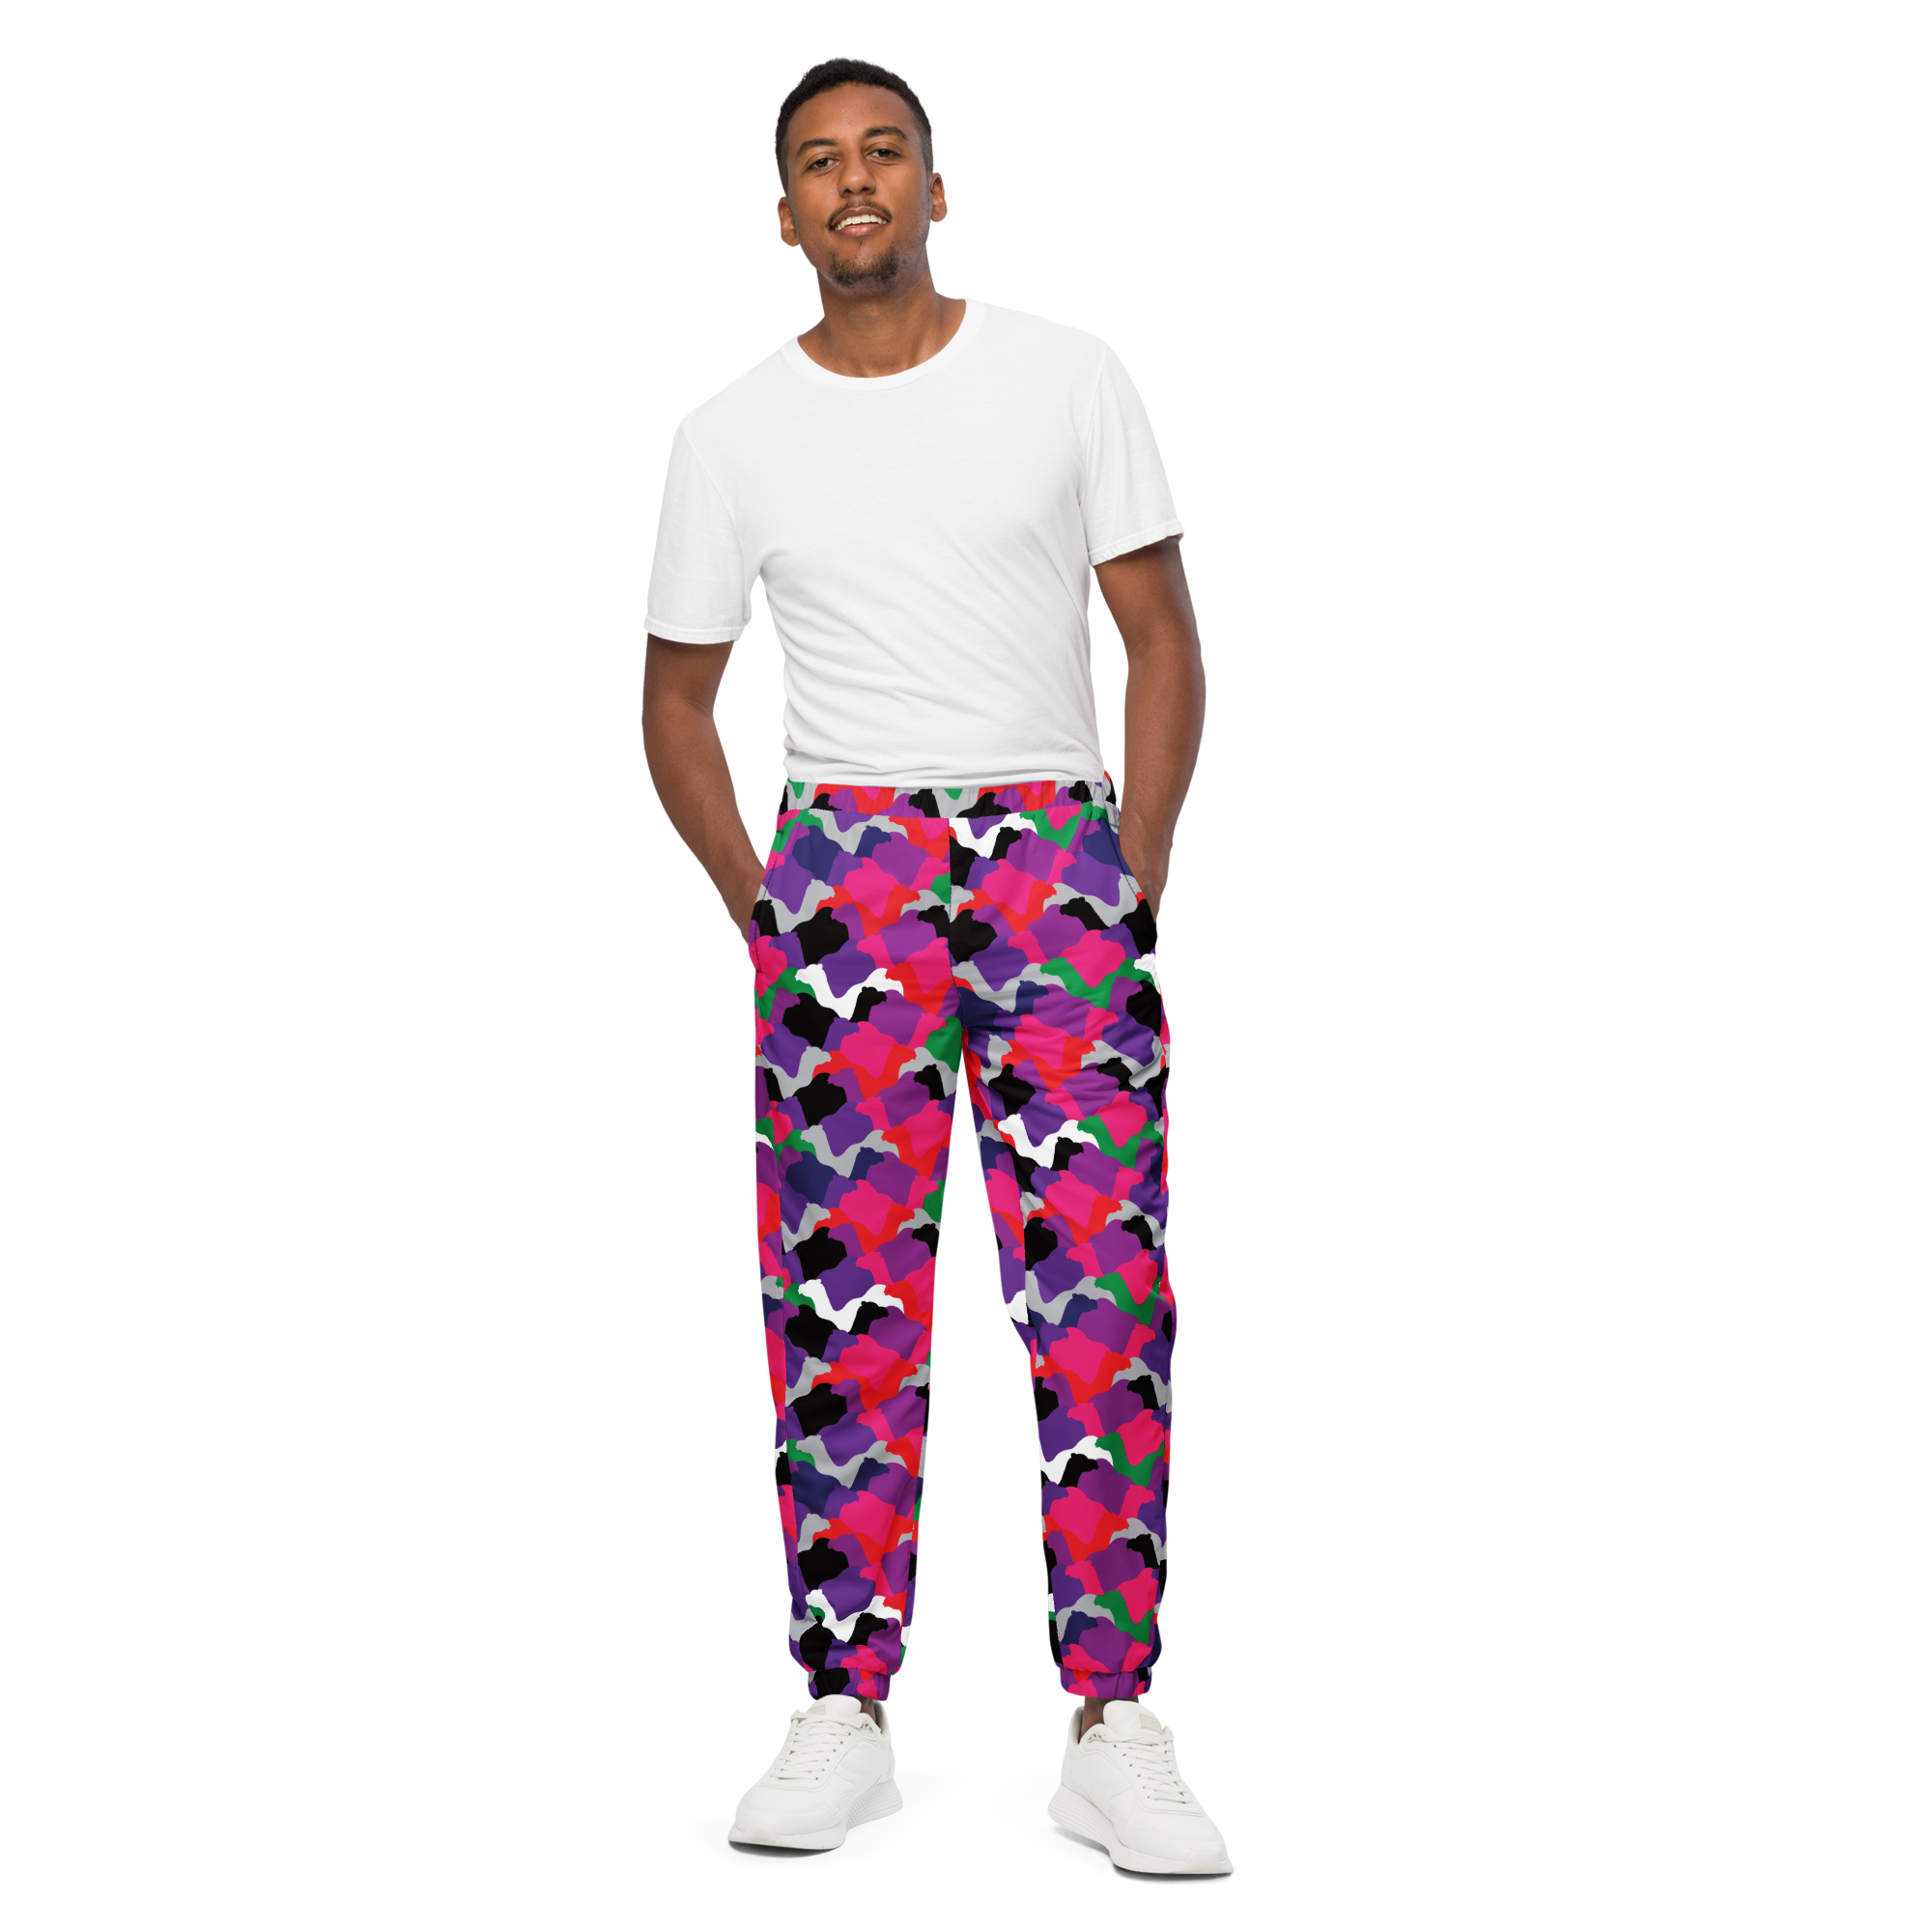 all-over-print-unisex-track-pants-black-front-6355f150d05e1.png